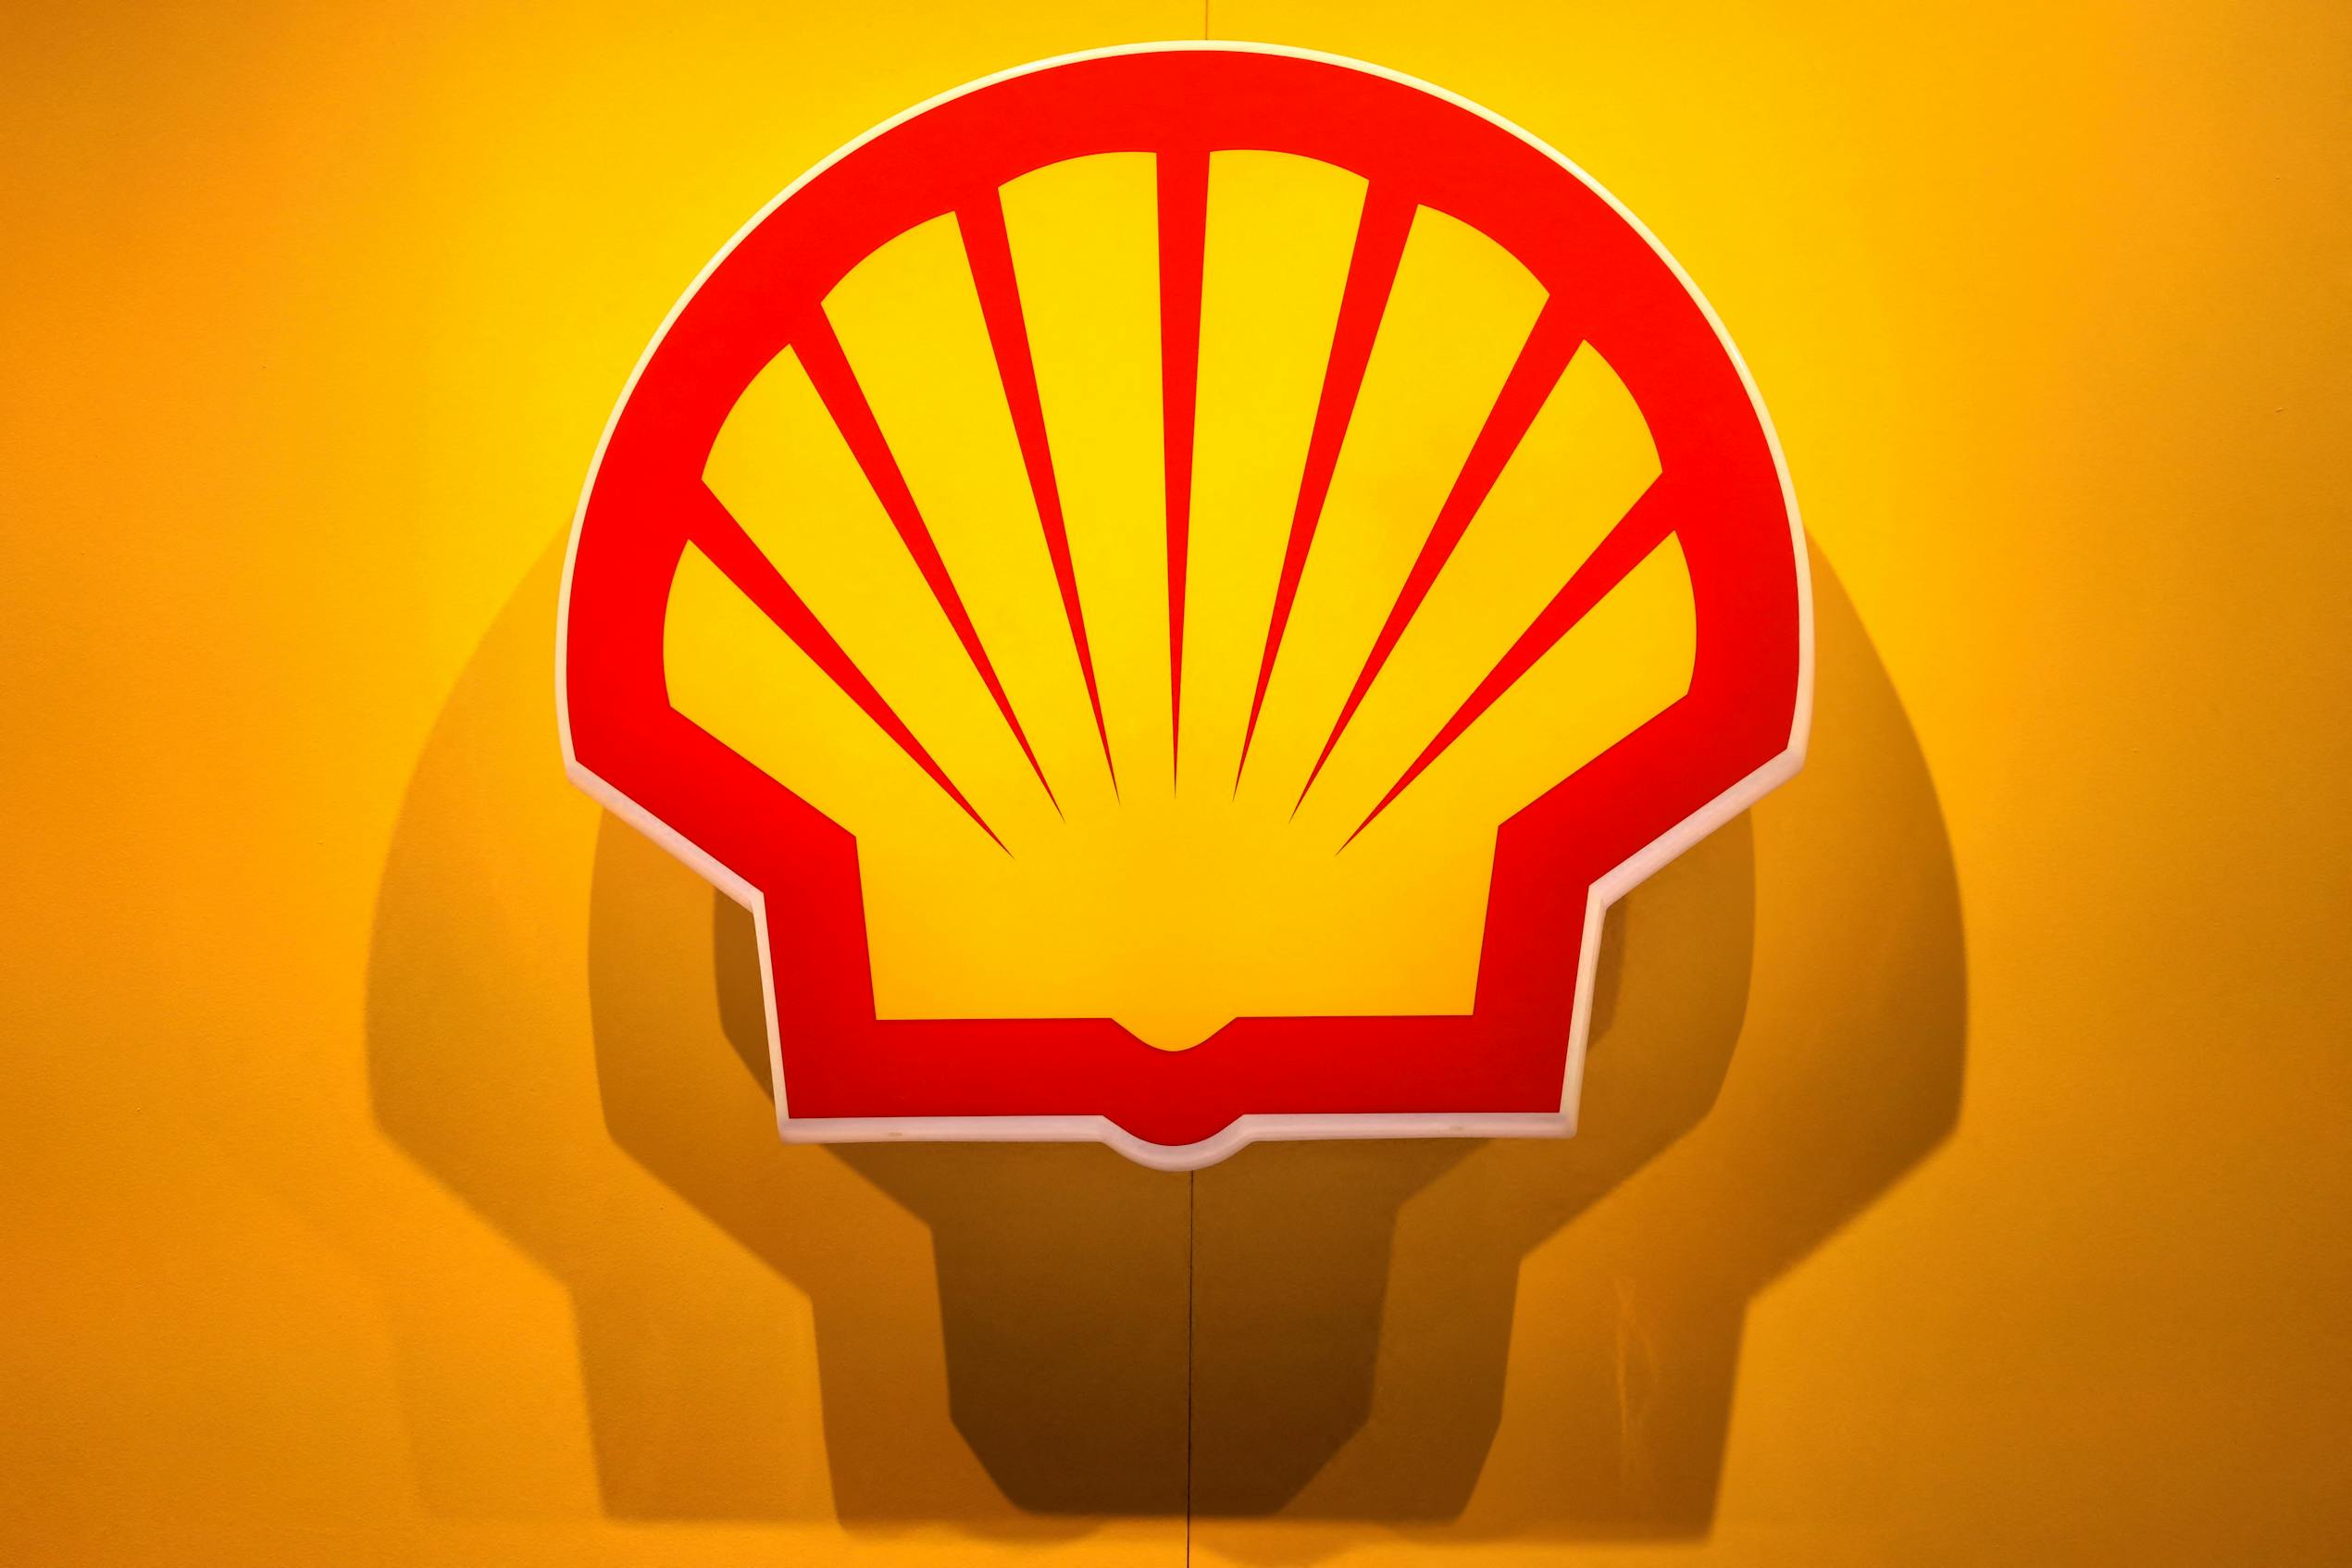 Shell boosts buybacks as gas trading boost Q3 profits to $6.2 billion ...